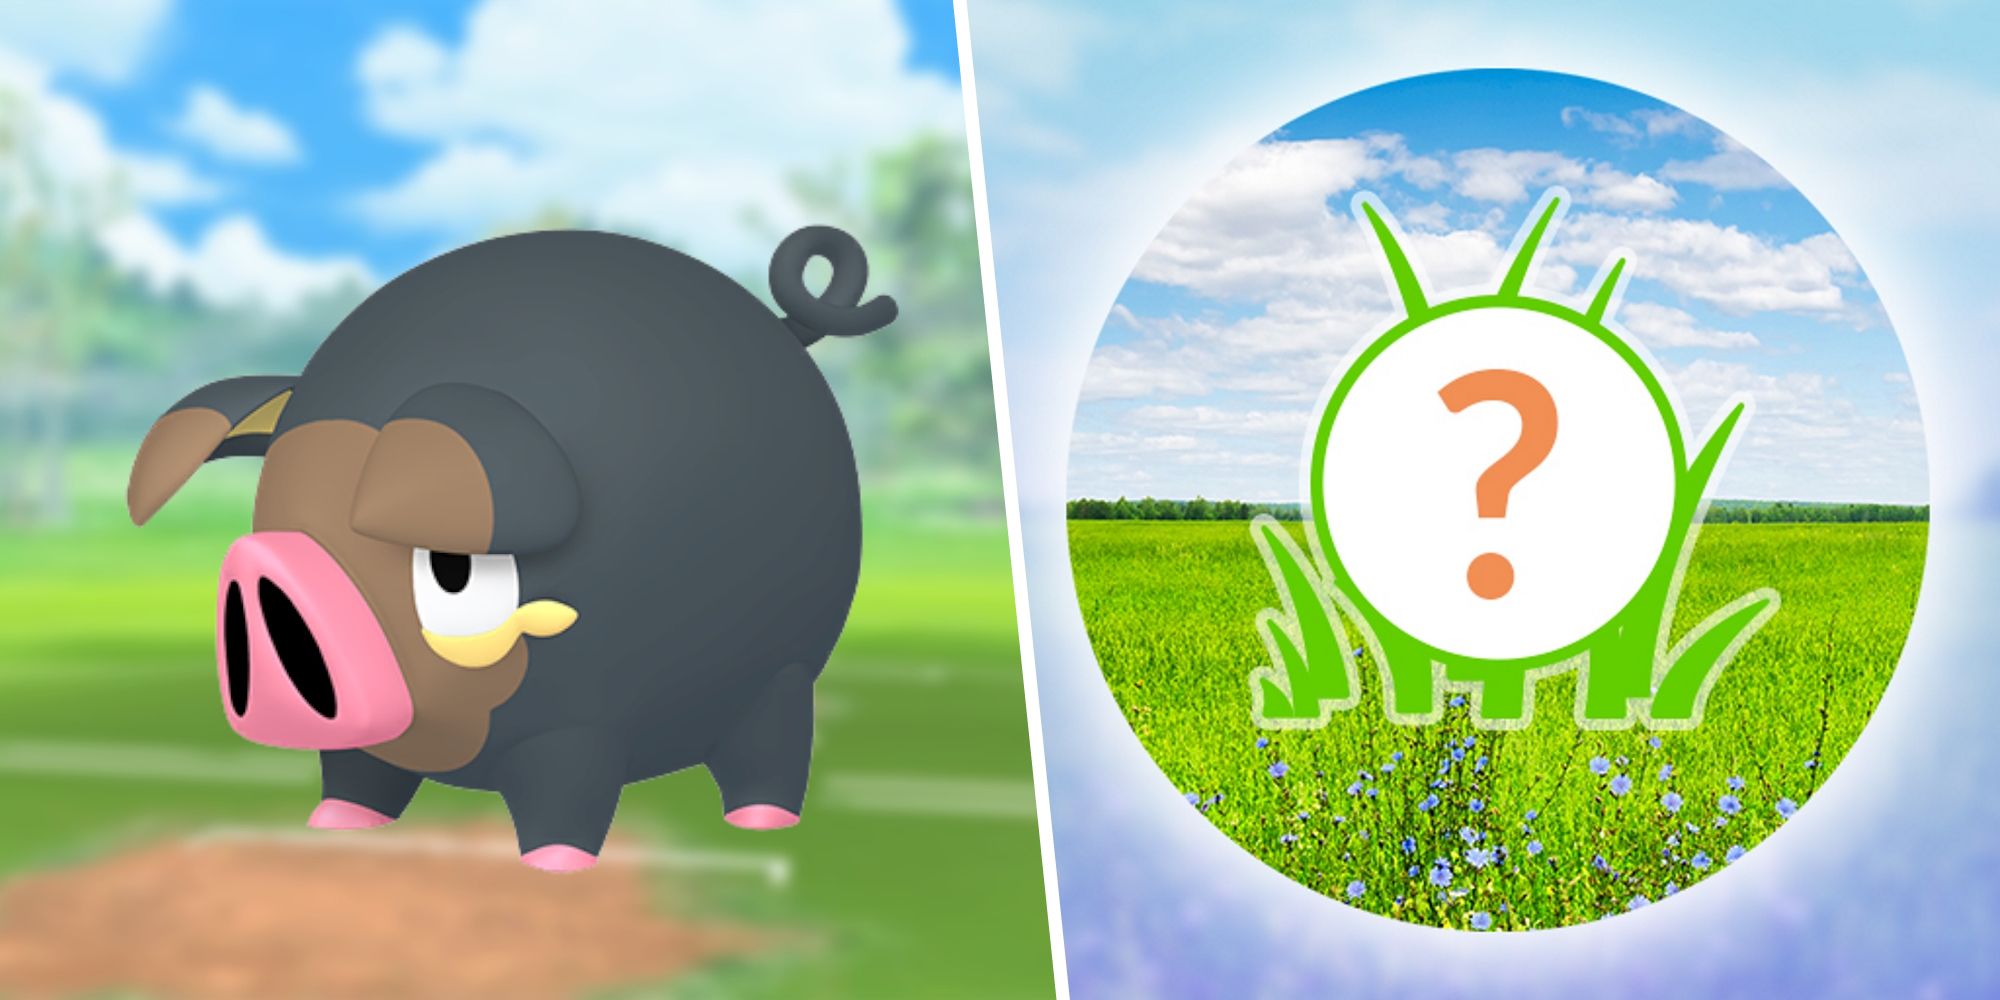 Image of Lechonk from Pokemon split with an image of the Pokemon Go wild encounter symbol